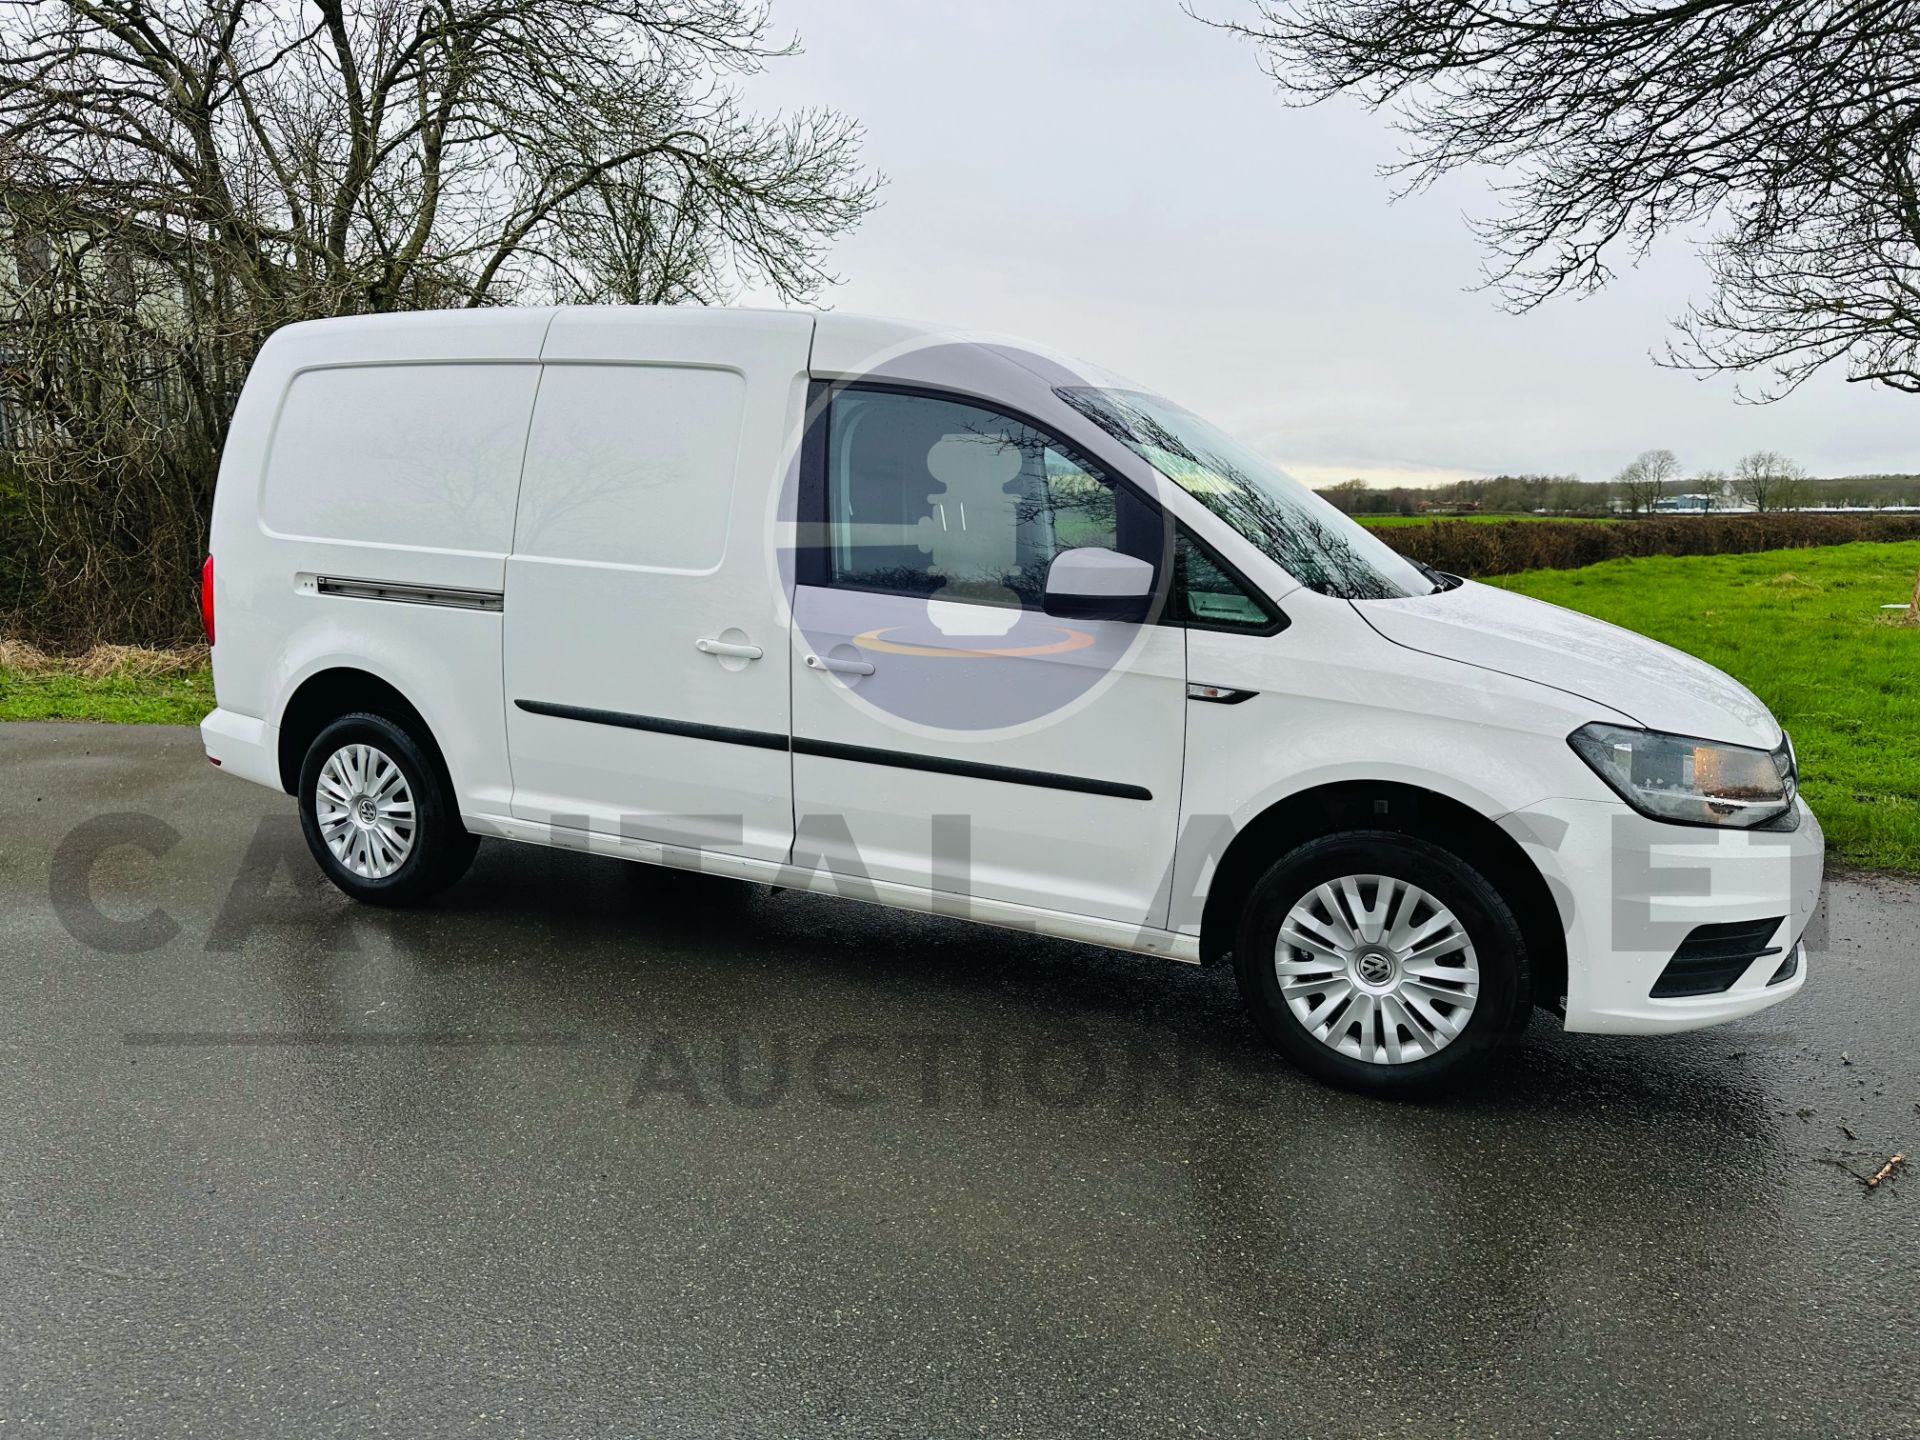 (ON SALE) VOLKSWAGEN CADDY 2.0TDI BMT TREND-LINE (2021 MODEL) MAXI / LWB-1 OWNER (AIR CON) EURO 6